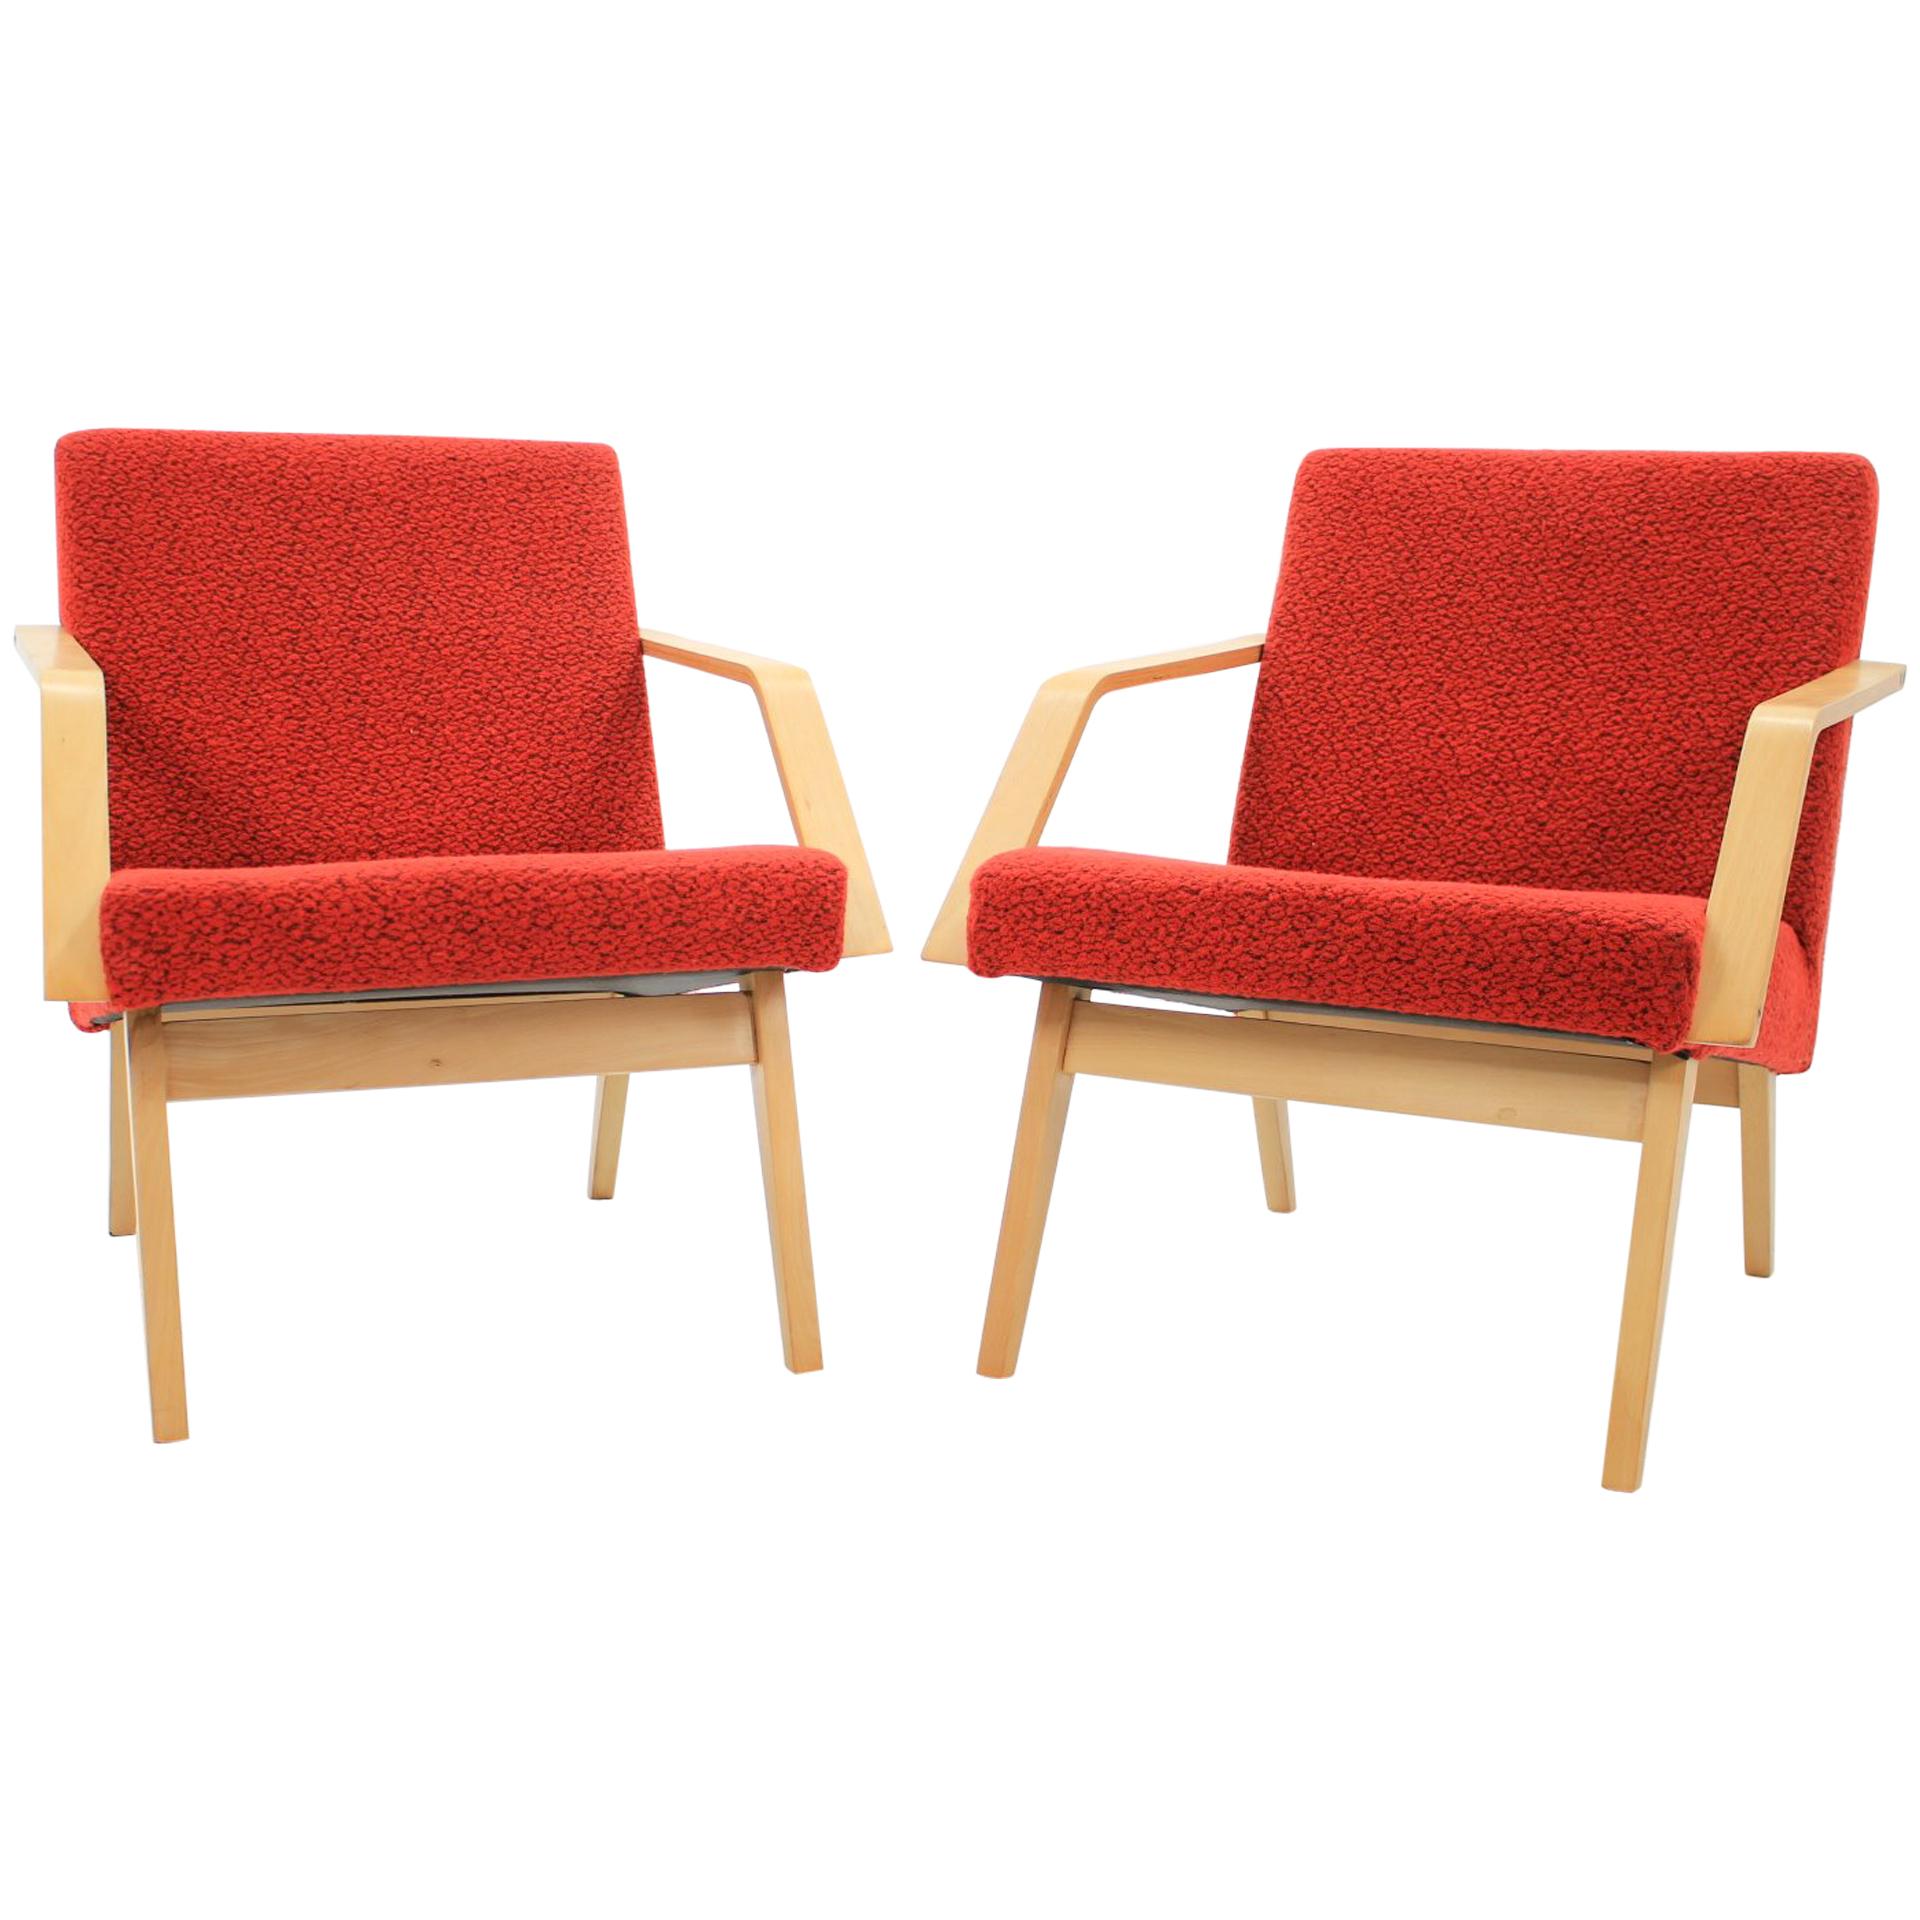 Set of Two Lounge Chair by Expo 58 Brusel, 1958's